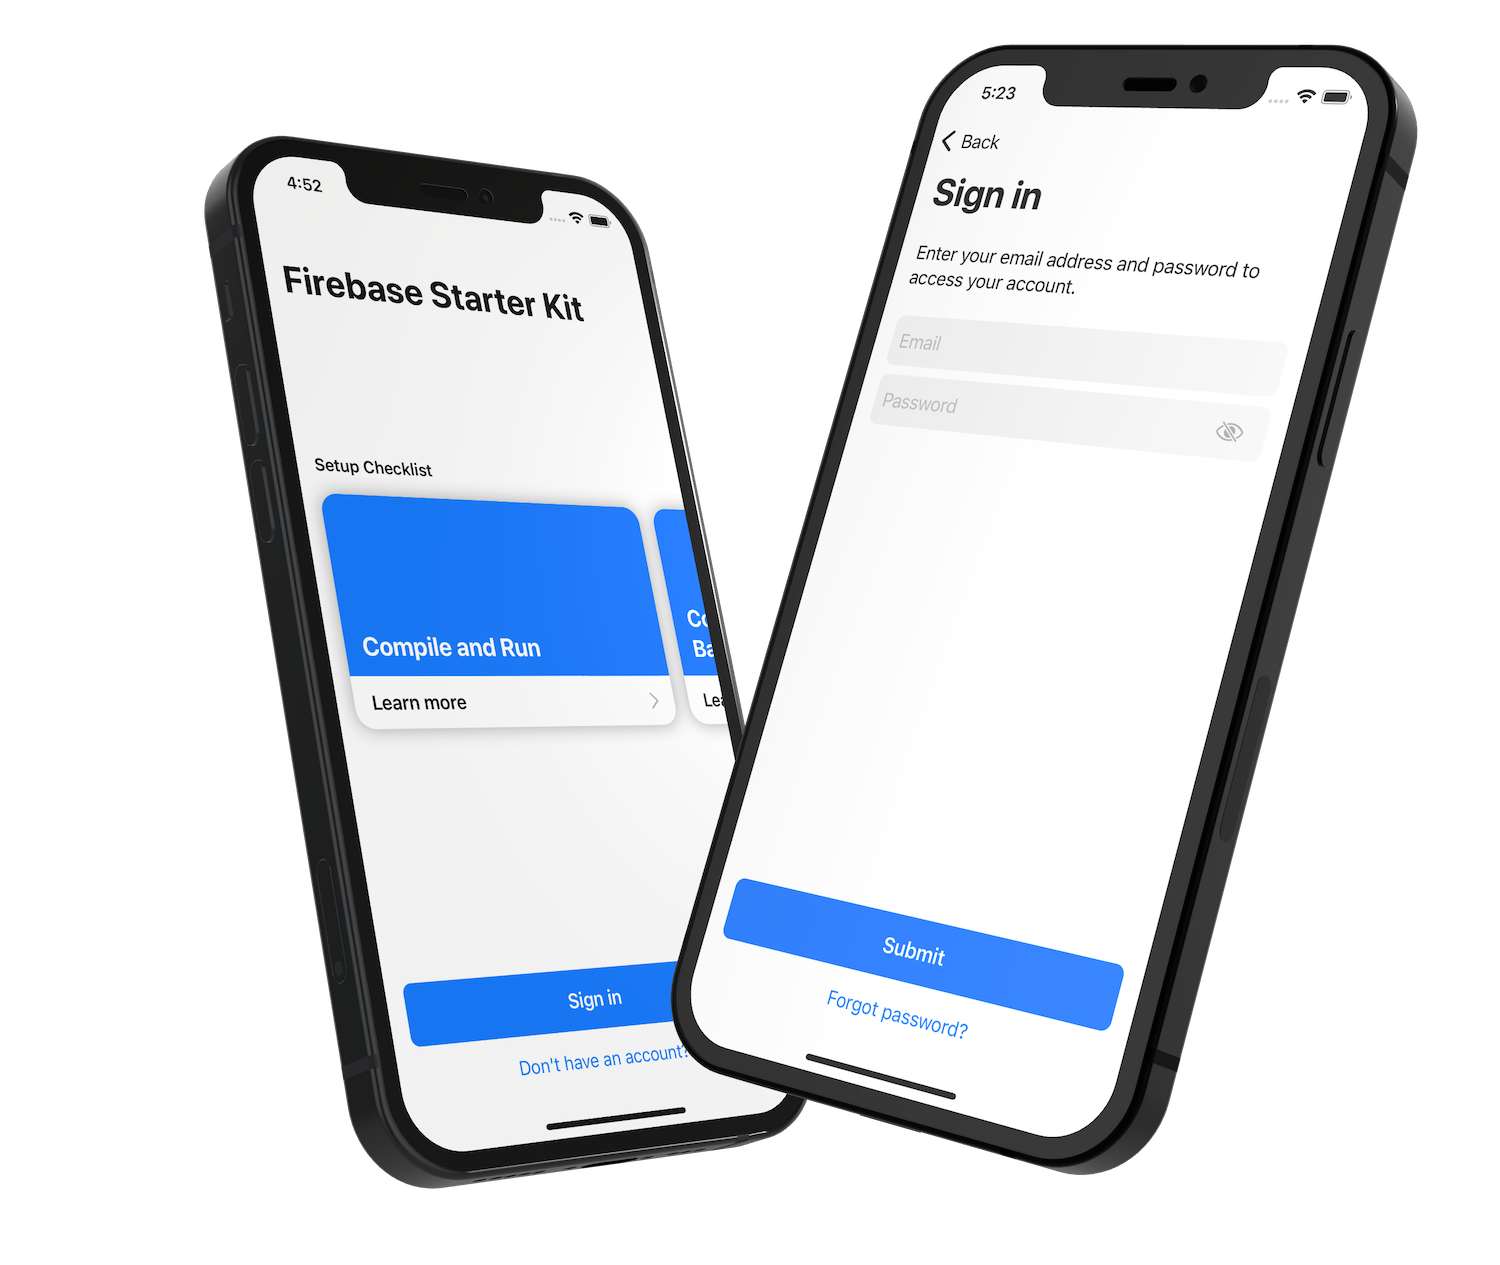 Firebase Starter Kit's home and sign-in screens on the iPhone 12.